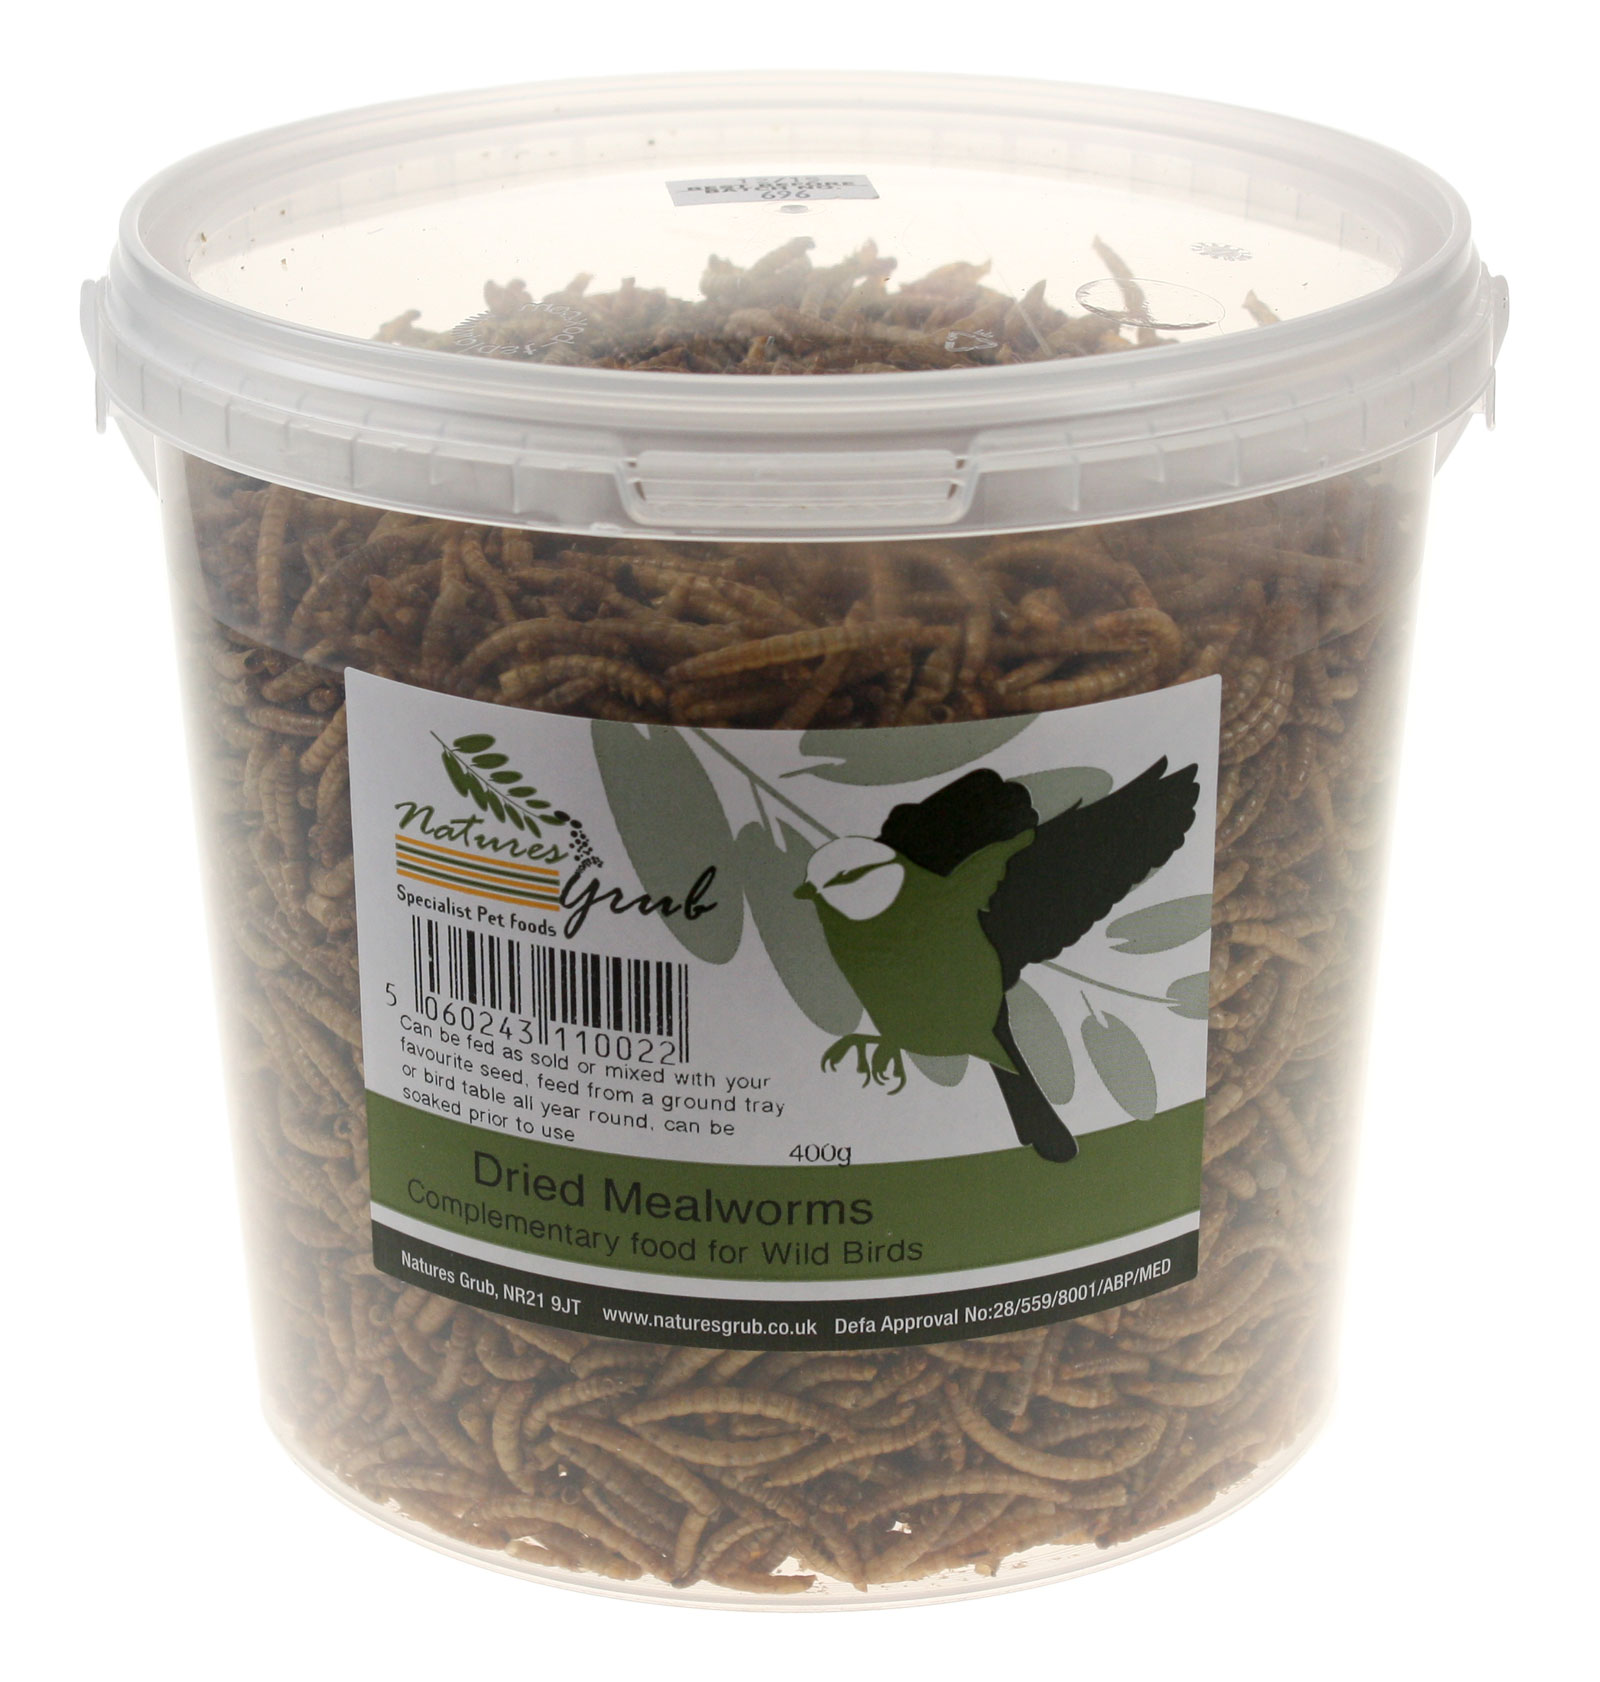 Natures Grub Dried Mealworms